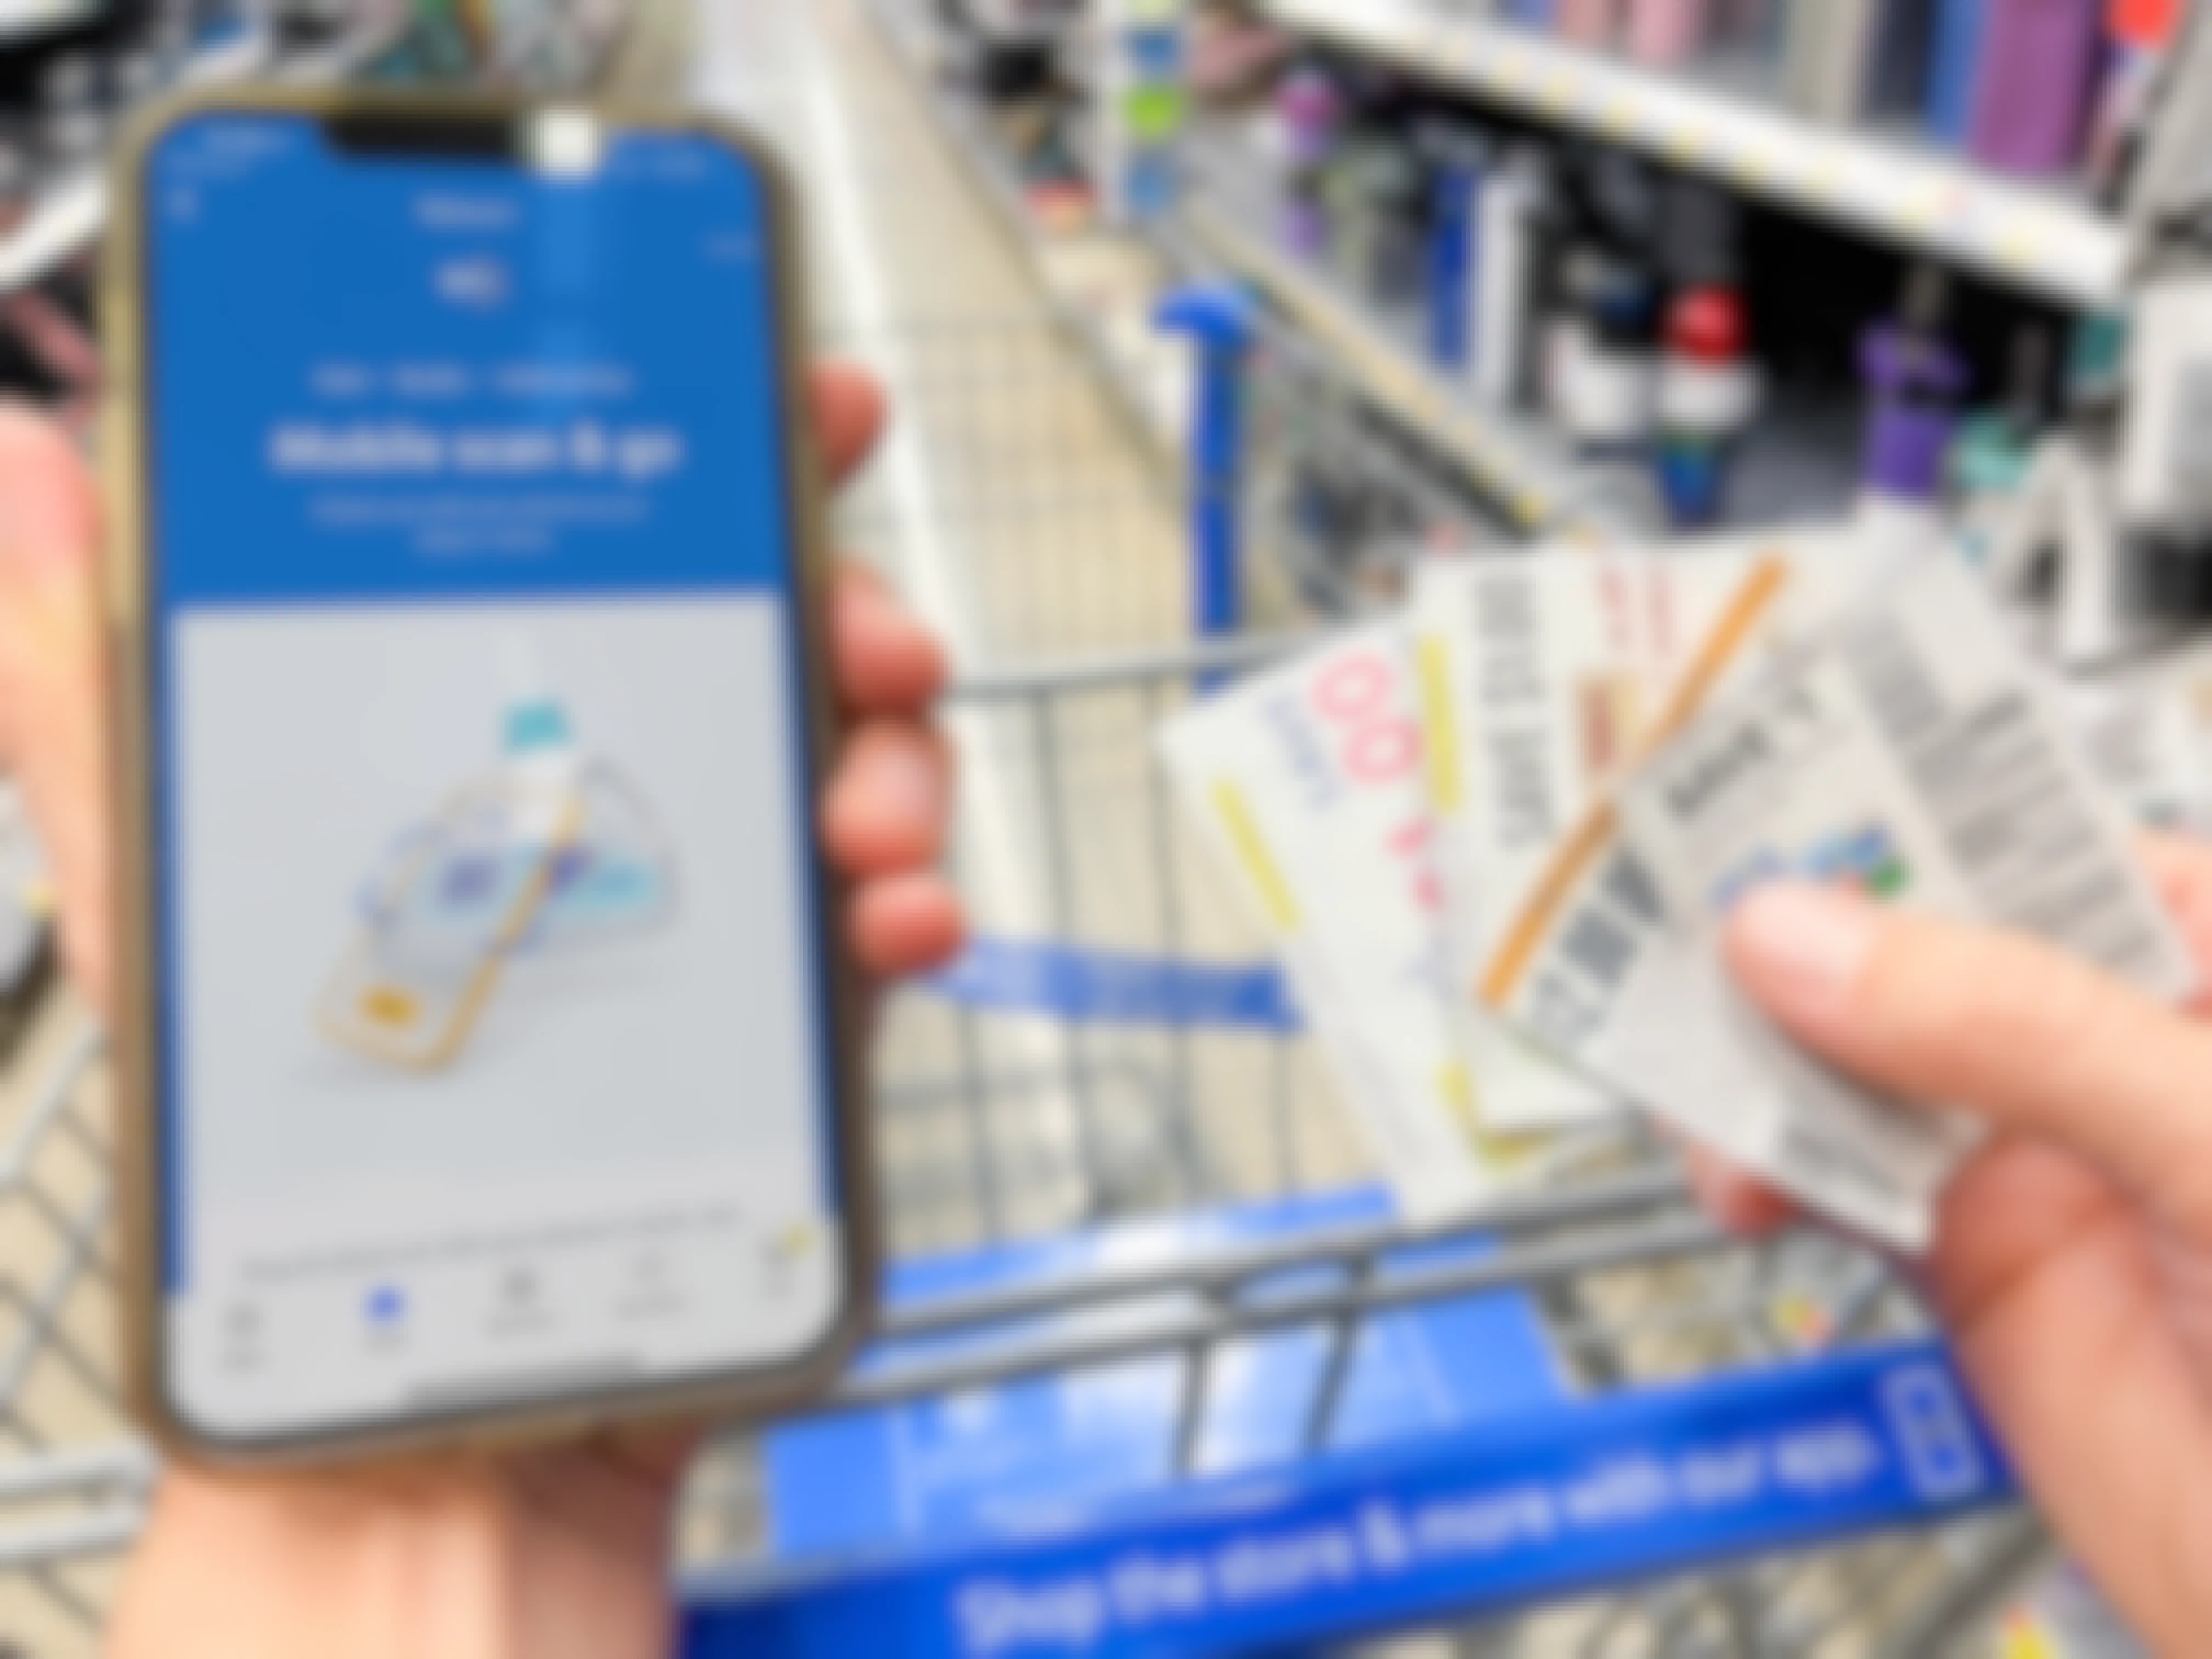 walmart app on cellphone in store by cart with other hand holding coupons